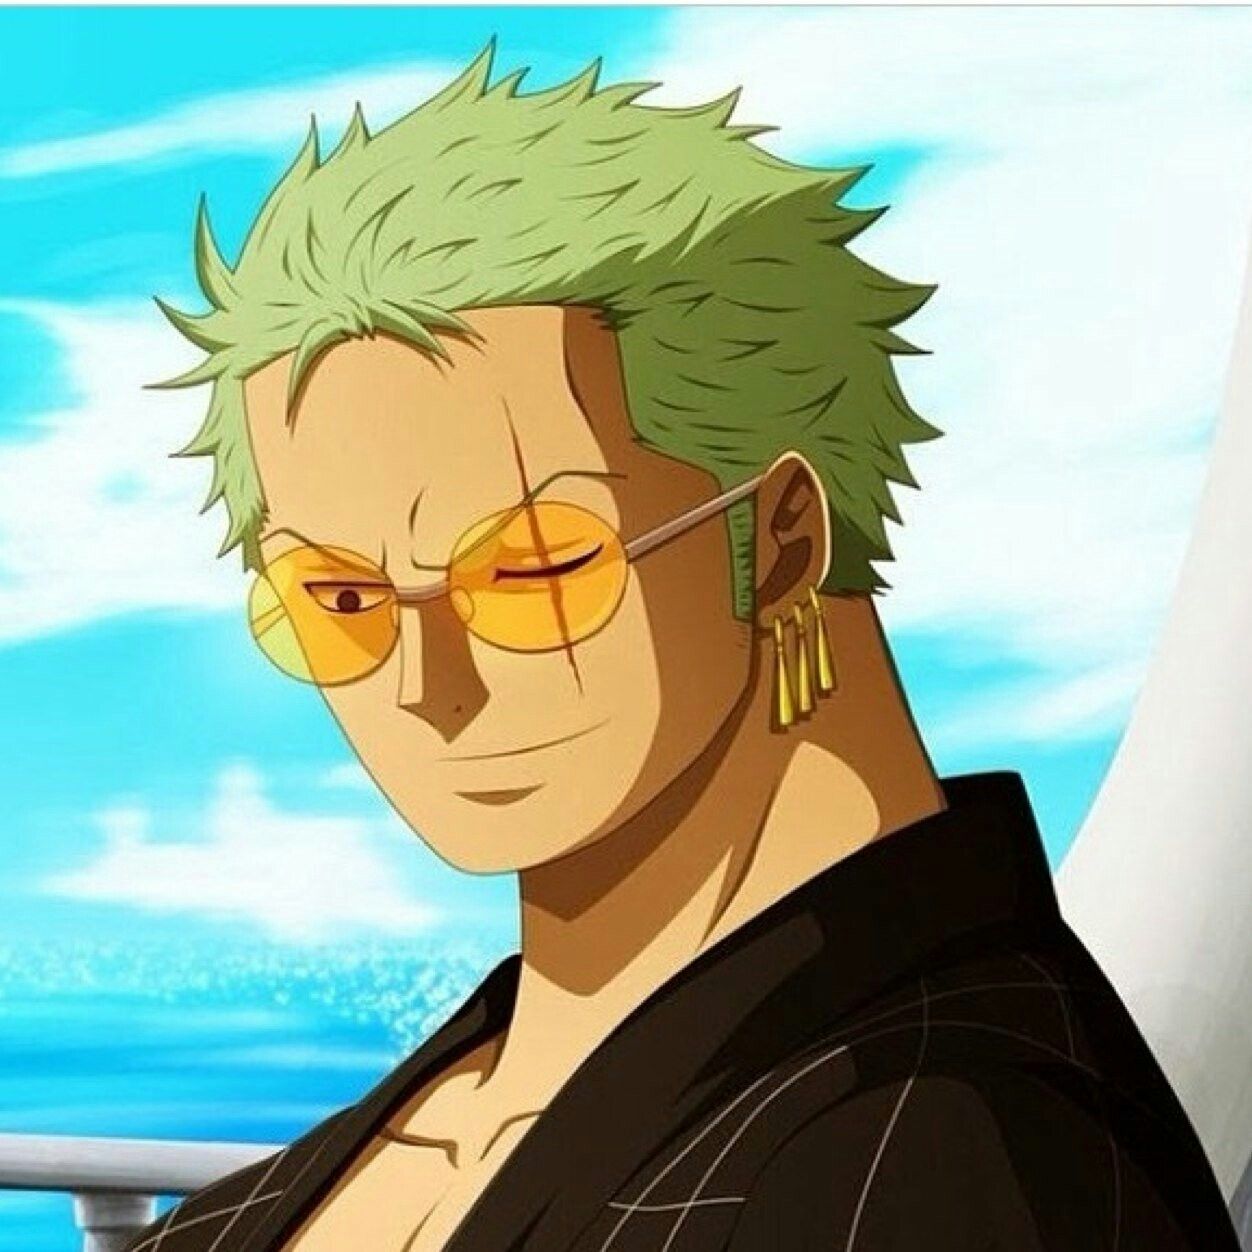 Zoro Wallpaper Pfp, Roronoa Zoro Wallpaper Phone collection of the zoro wallpaper and background available for download for free